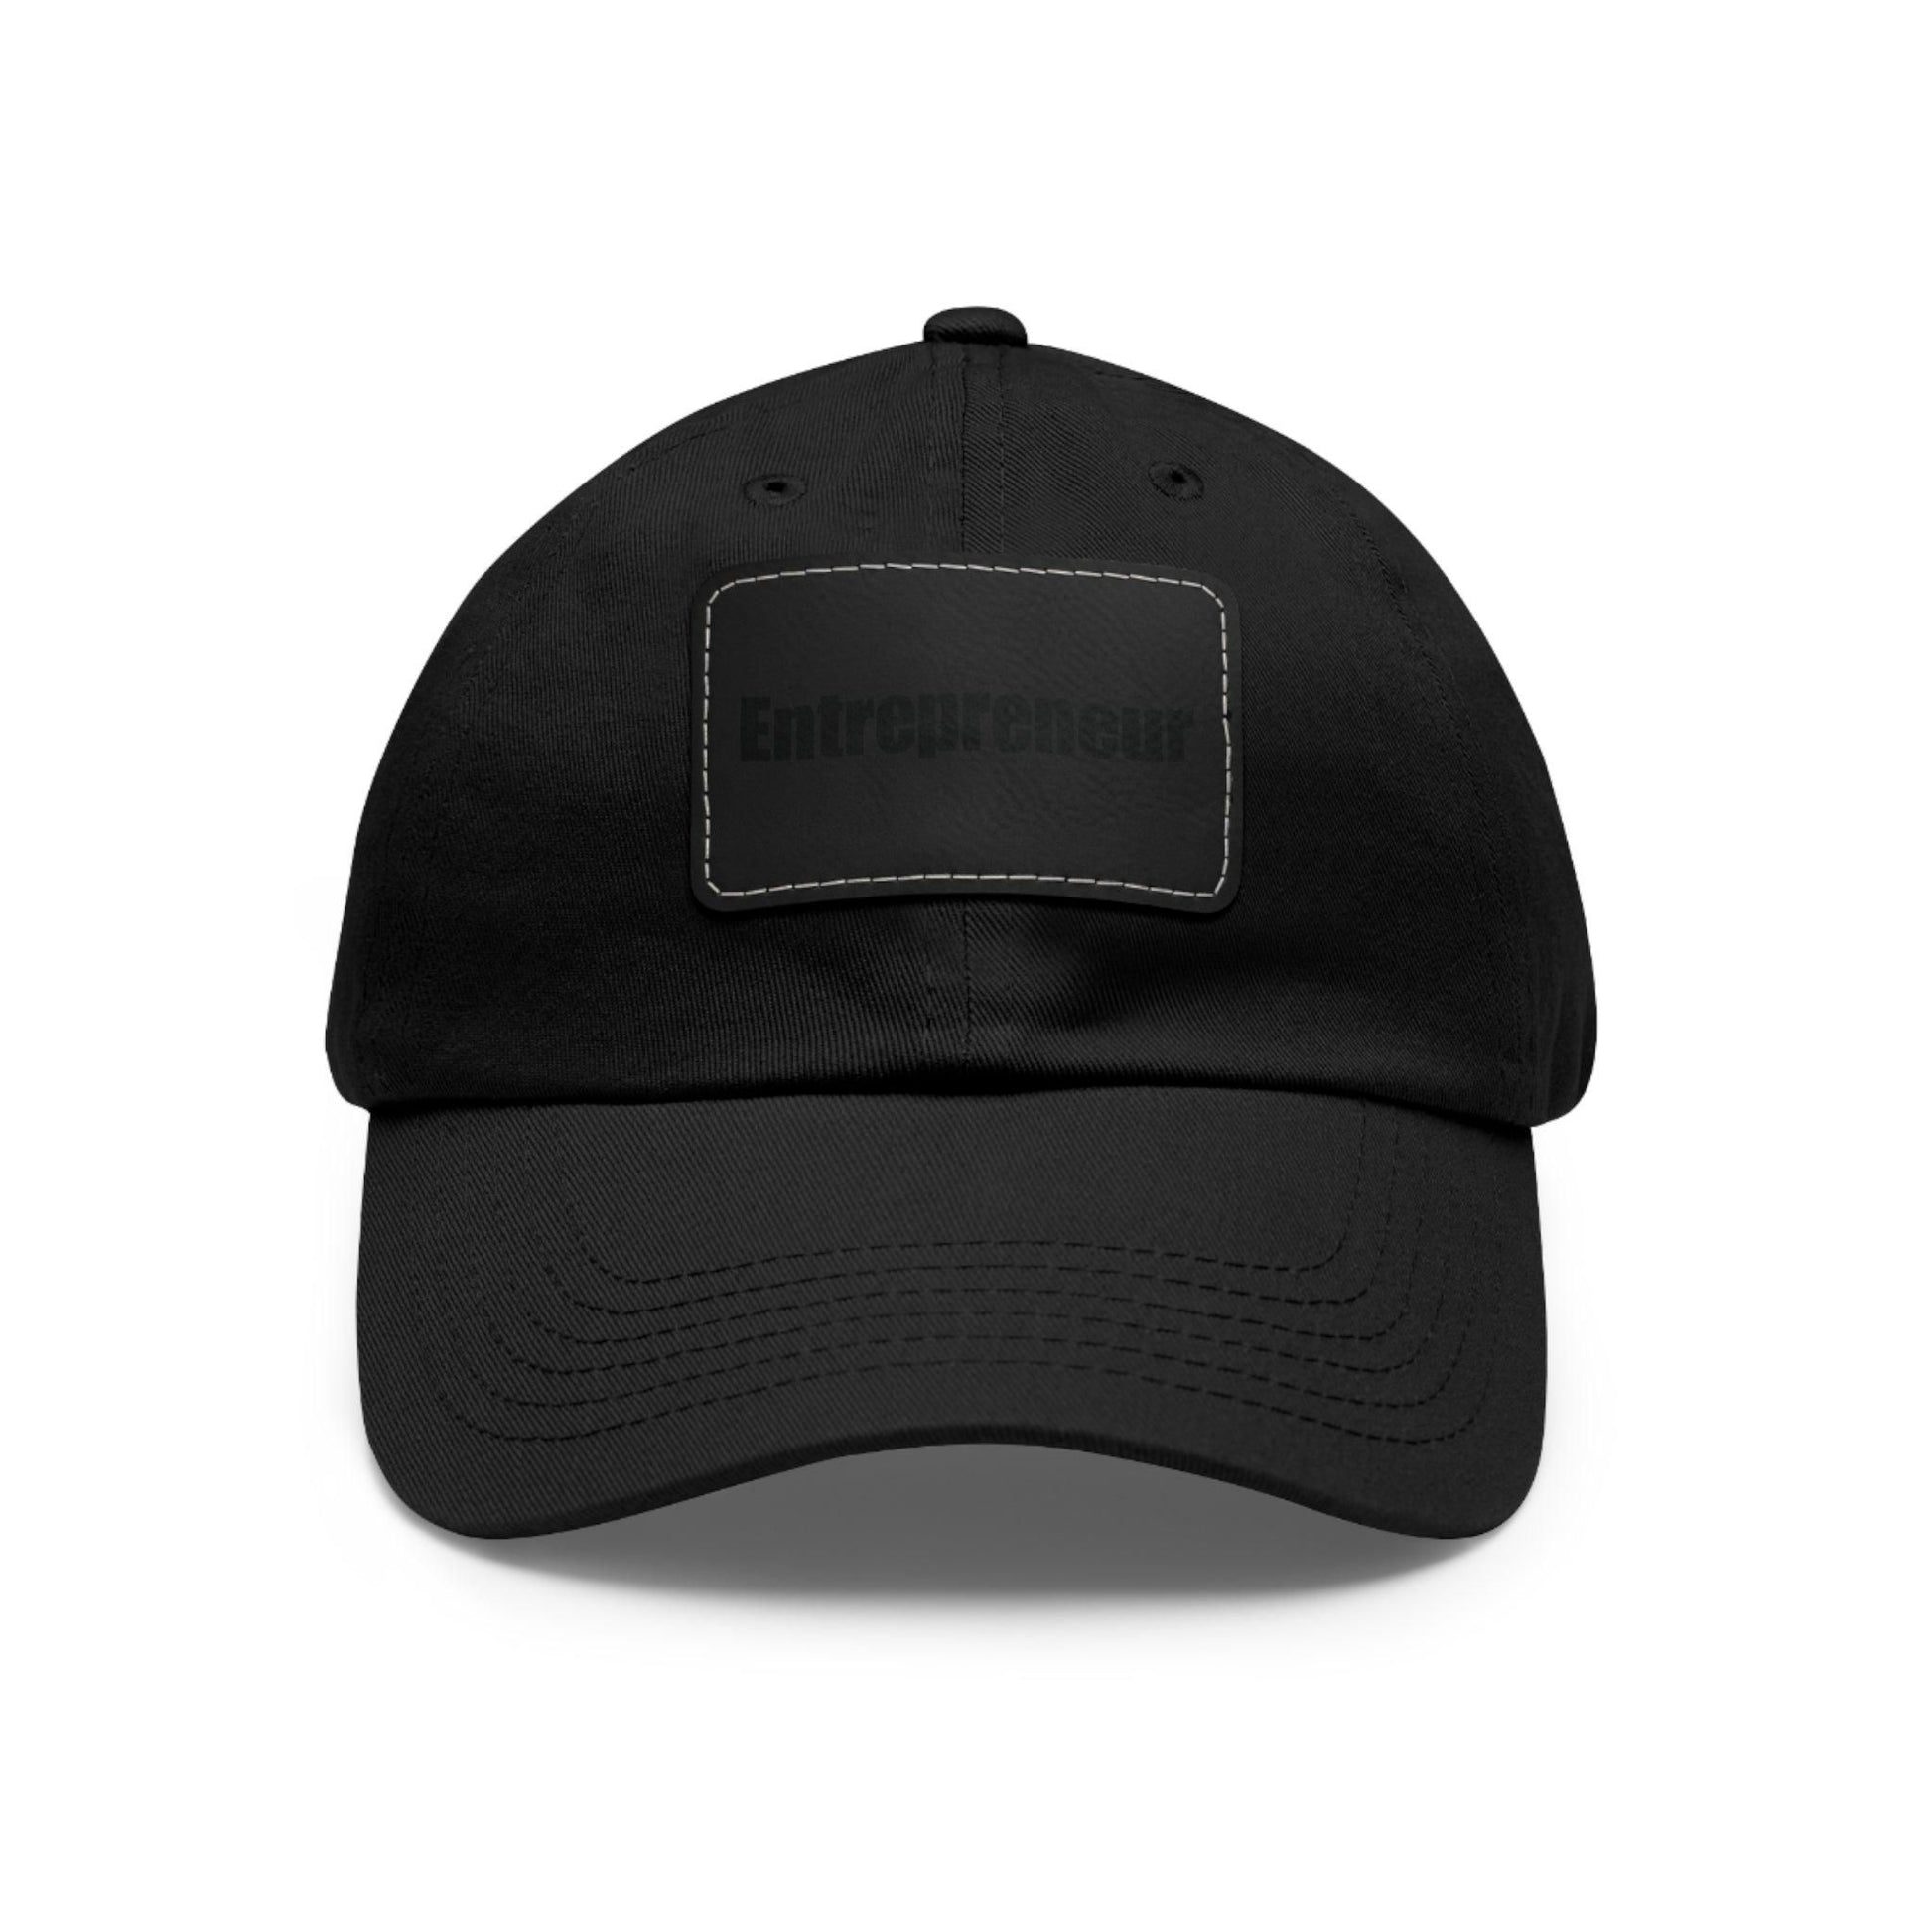 Entrepreneur Baseball Hat with Leather Patch Cap Black / Black patch Rectangle One size